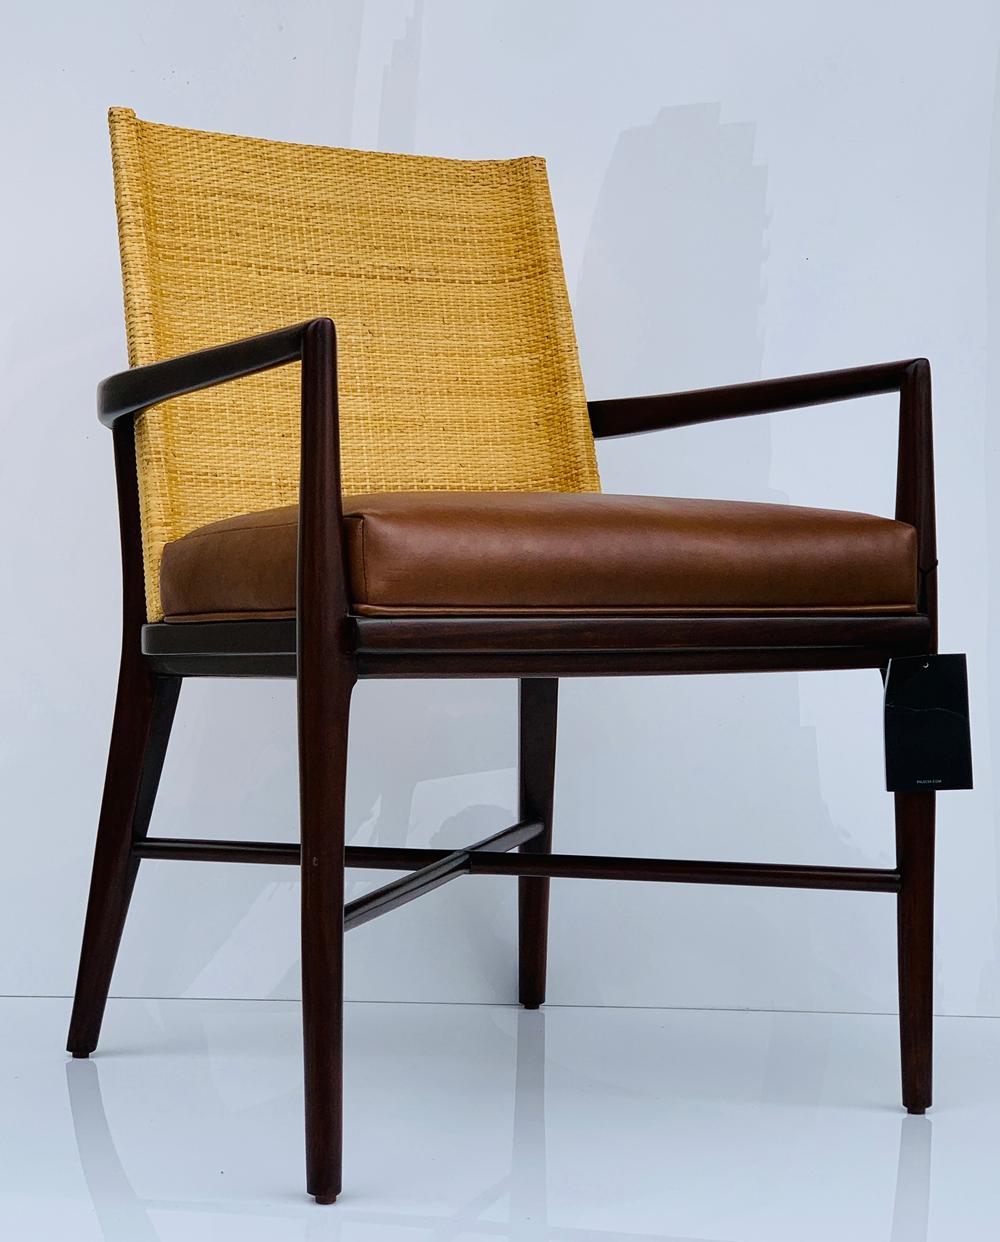 Set of 6 Hanover armchairs designed and manufactured by Palacek and made in 2018, new with tags.

The chairs are made of solid wood, with leather seats and hand woven cane backs.

Measurements:
34 inches high x 24 inches wide by 24 inches deep